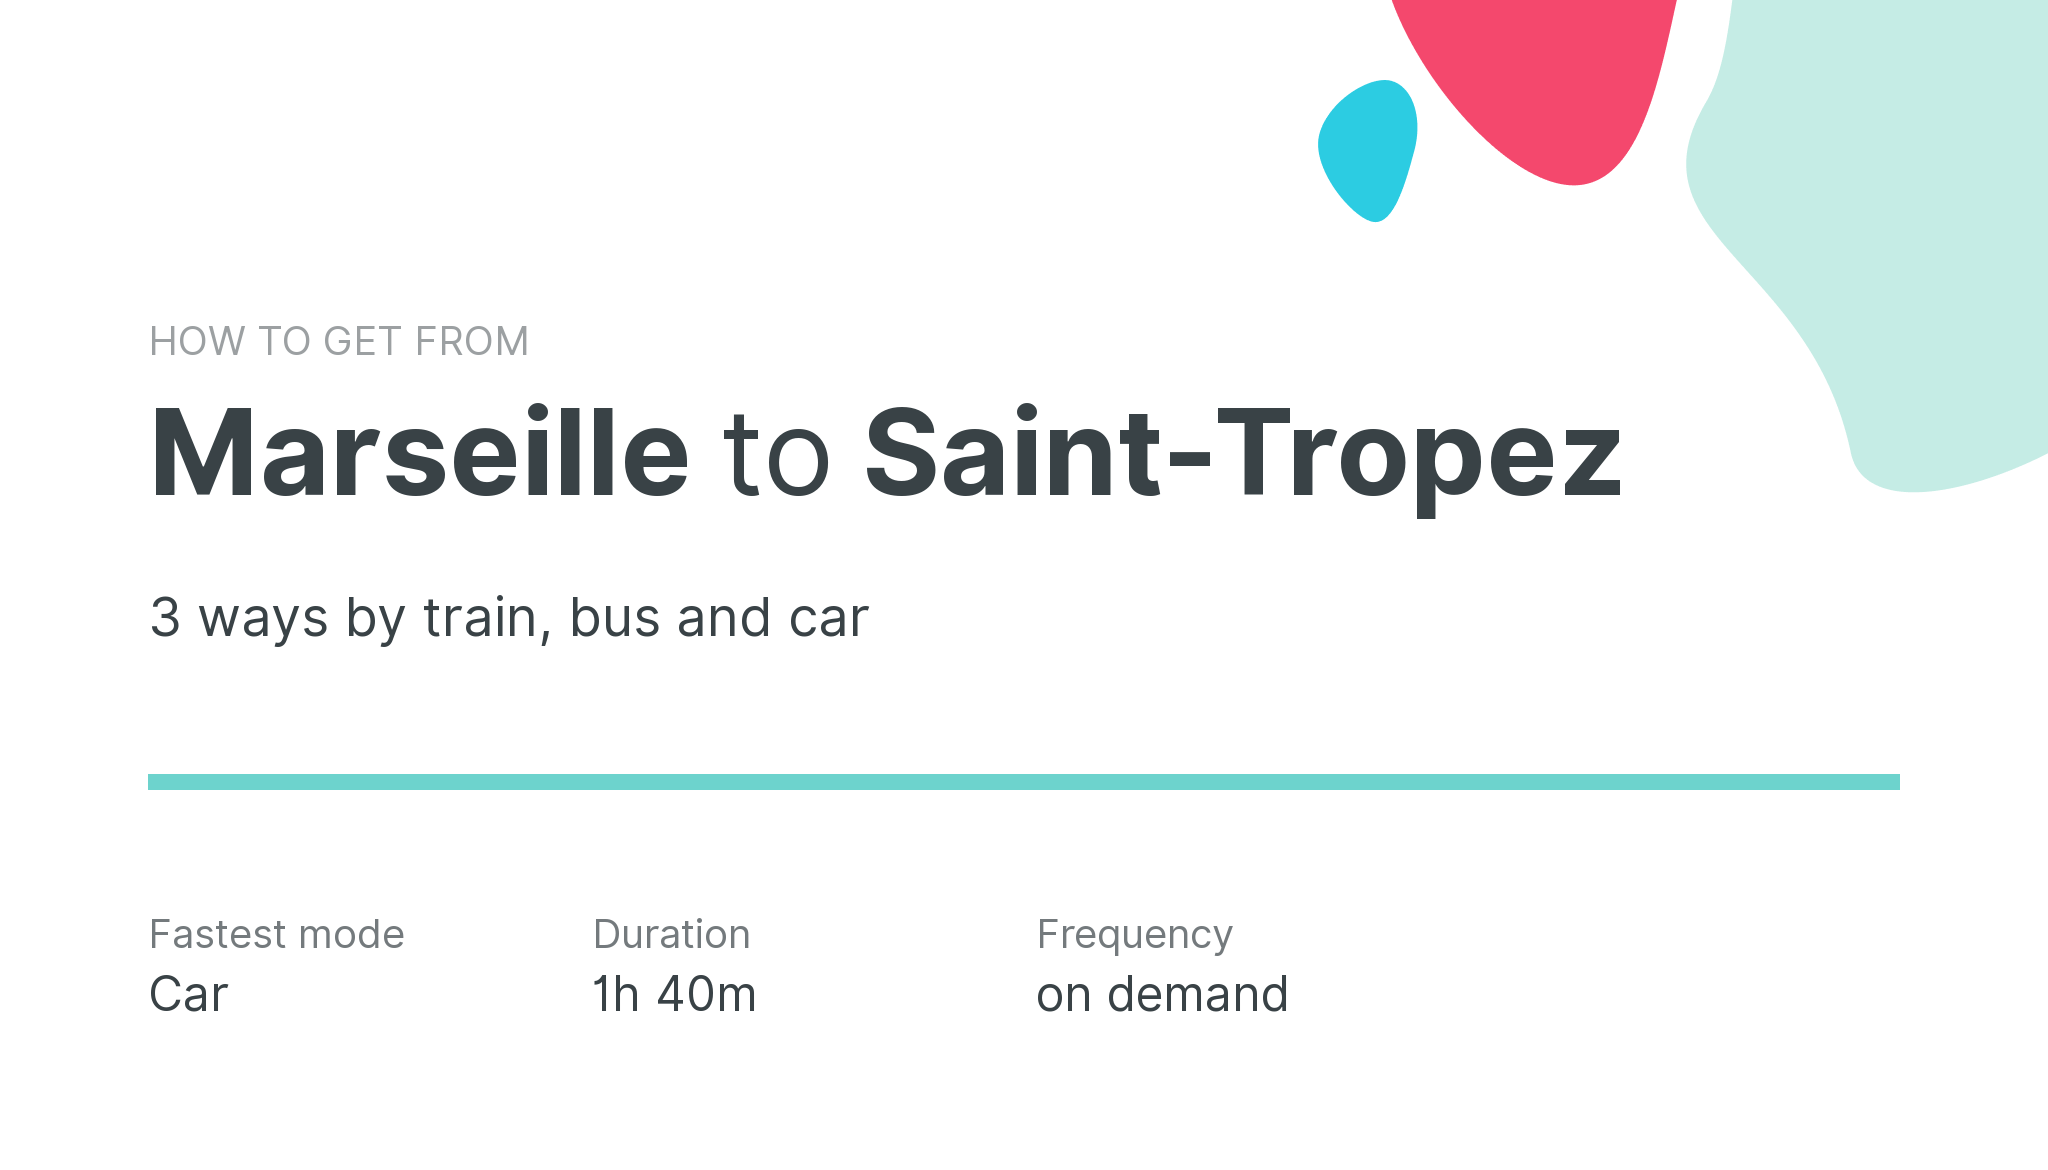 How do I get from Marseille to Saint-Tropez